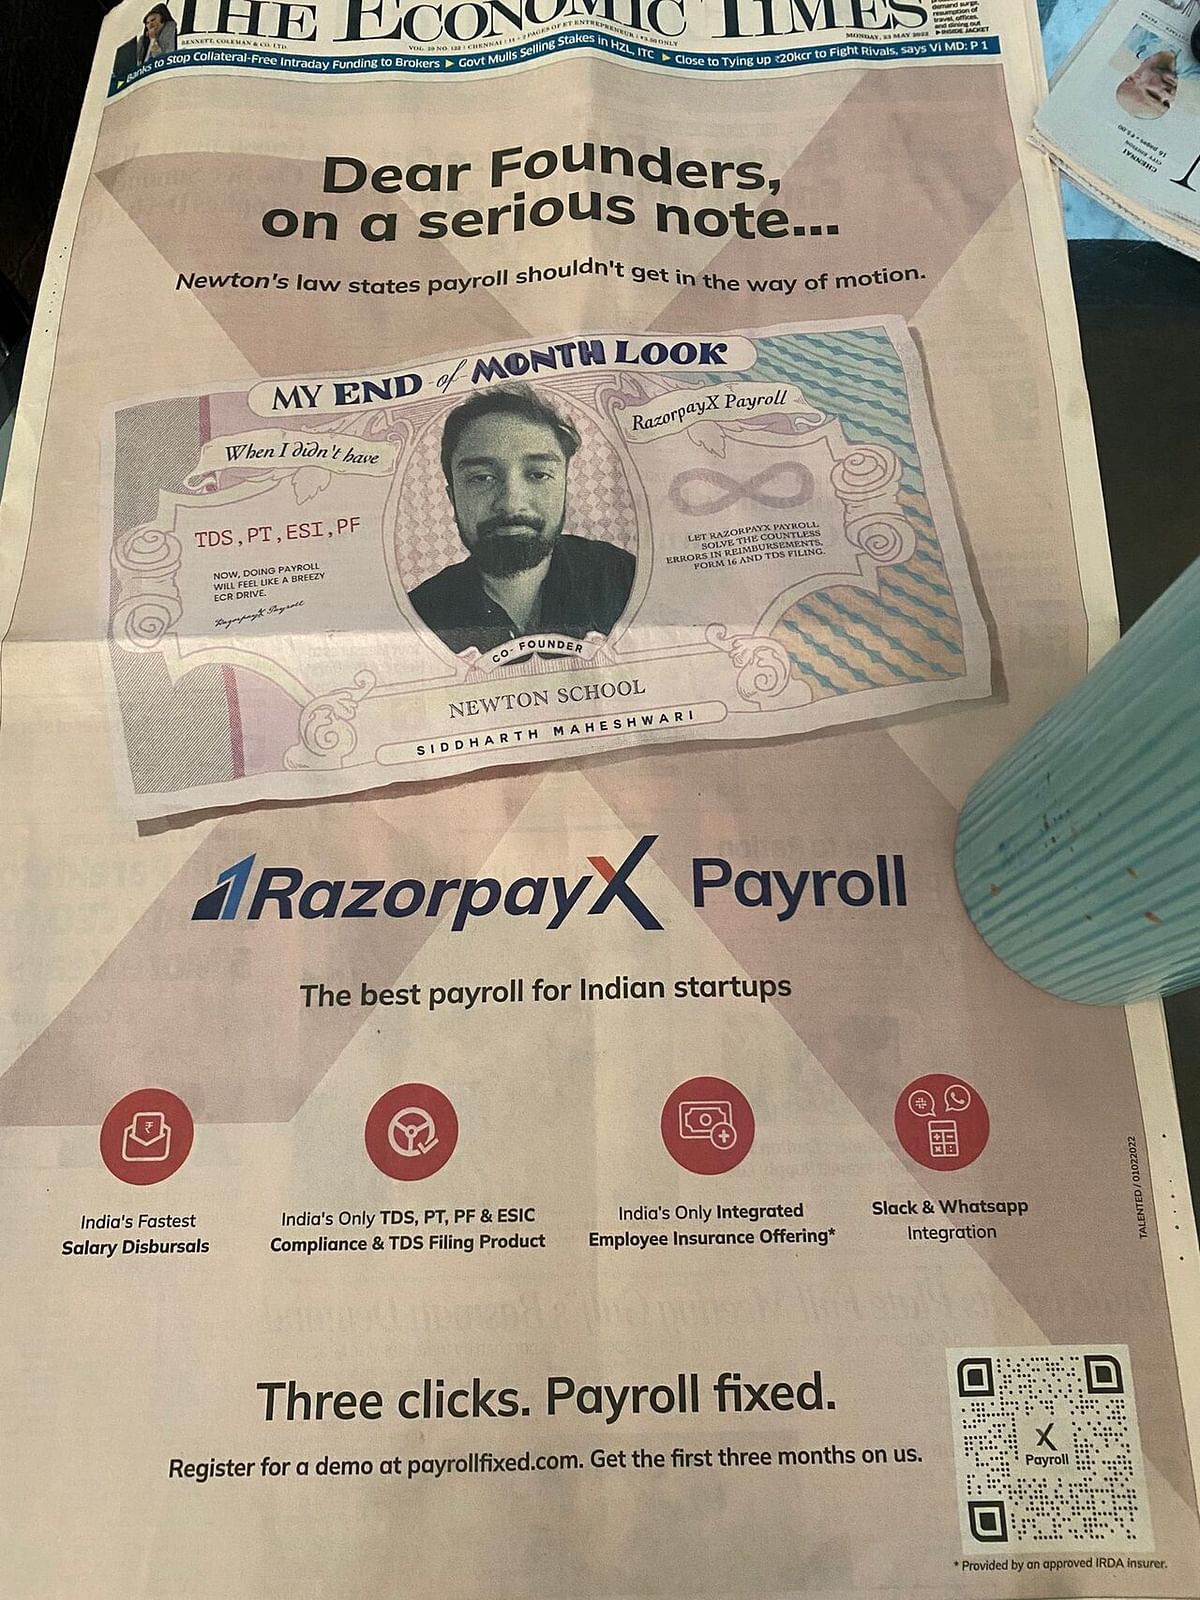 RazorpayX ropes in more CEOs for print leg of campaign